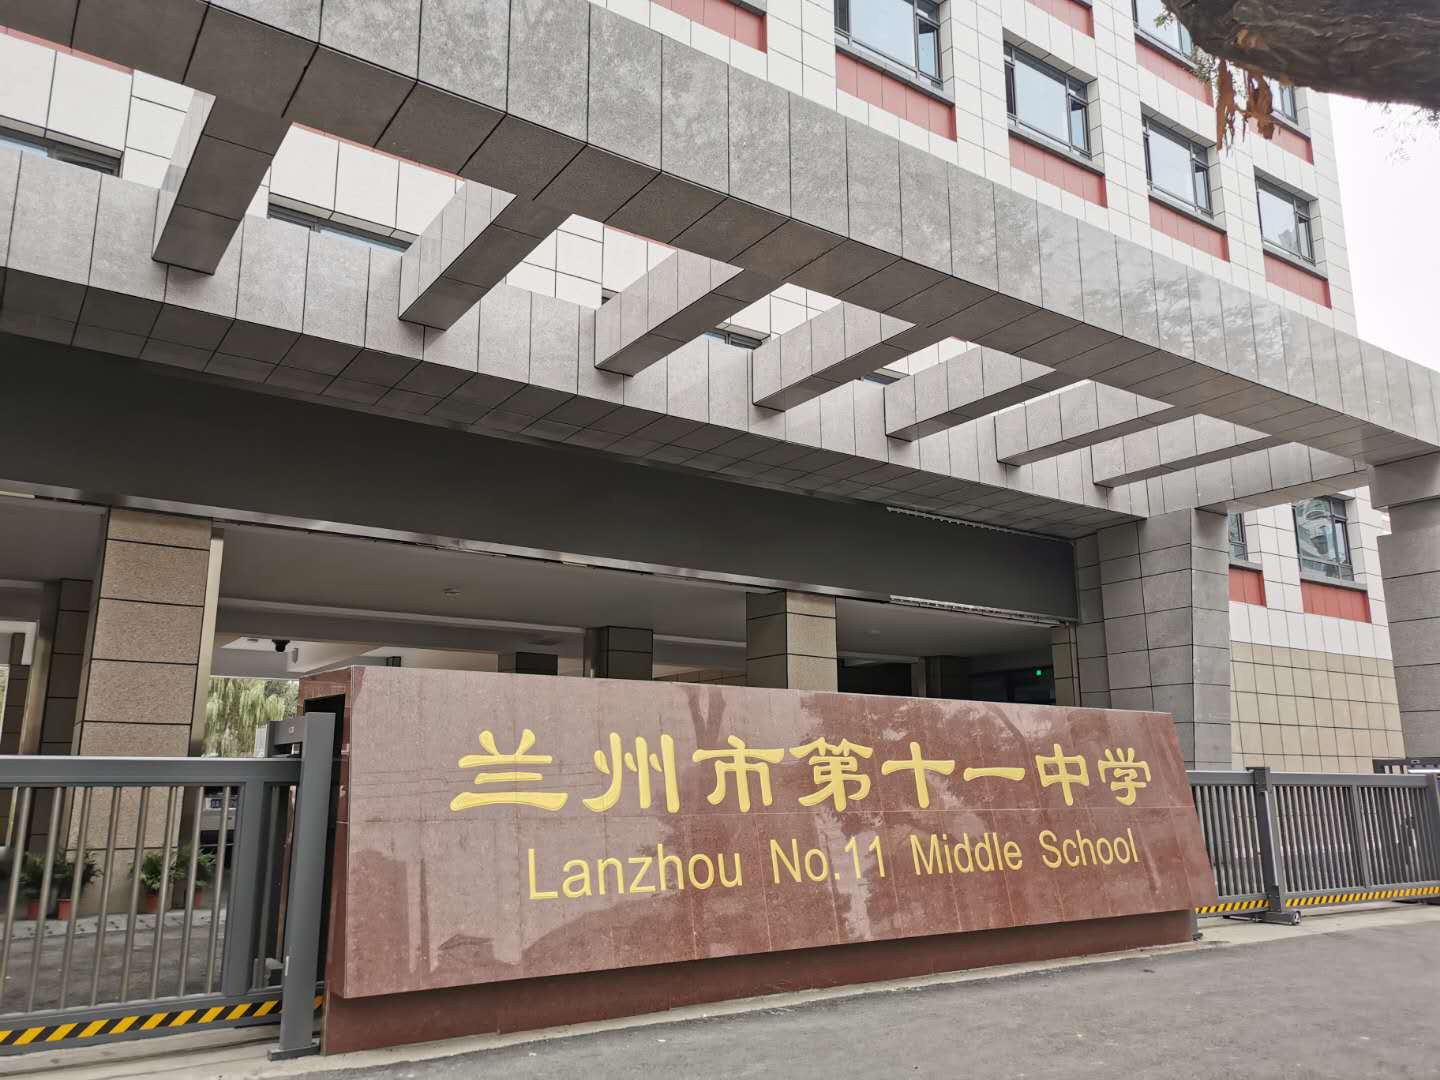 Case Sharing 【 DSPPA IP Network PA system】lanzhou No.11 Middle School